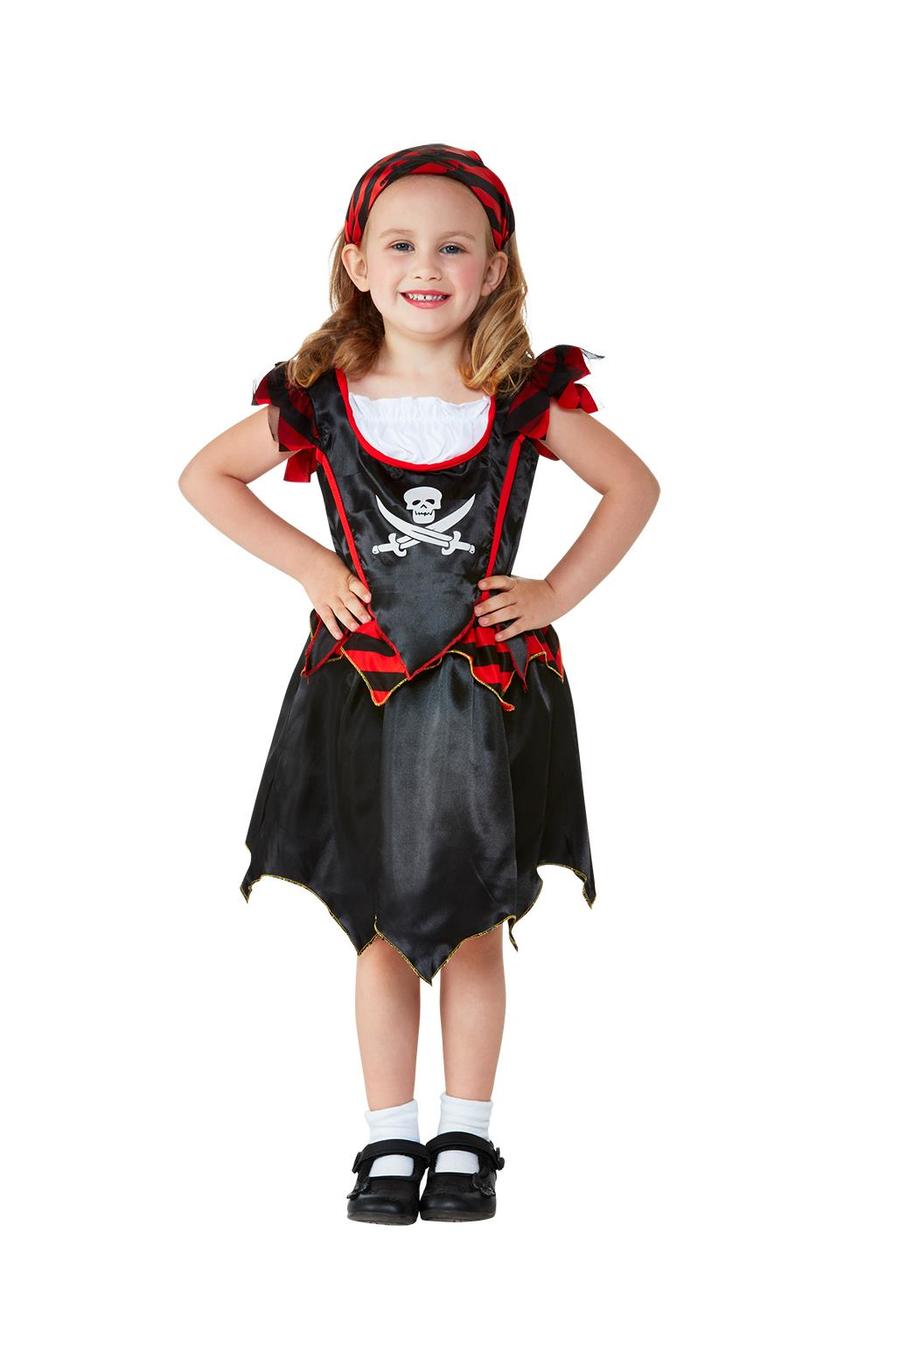 Click to view product details and reviews for Smiffys Fancy Dress Toddler Pirate Skull Crossbones Costume Fancy Dress Toddler Age 1 2.